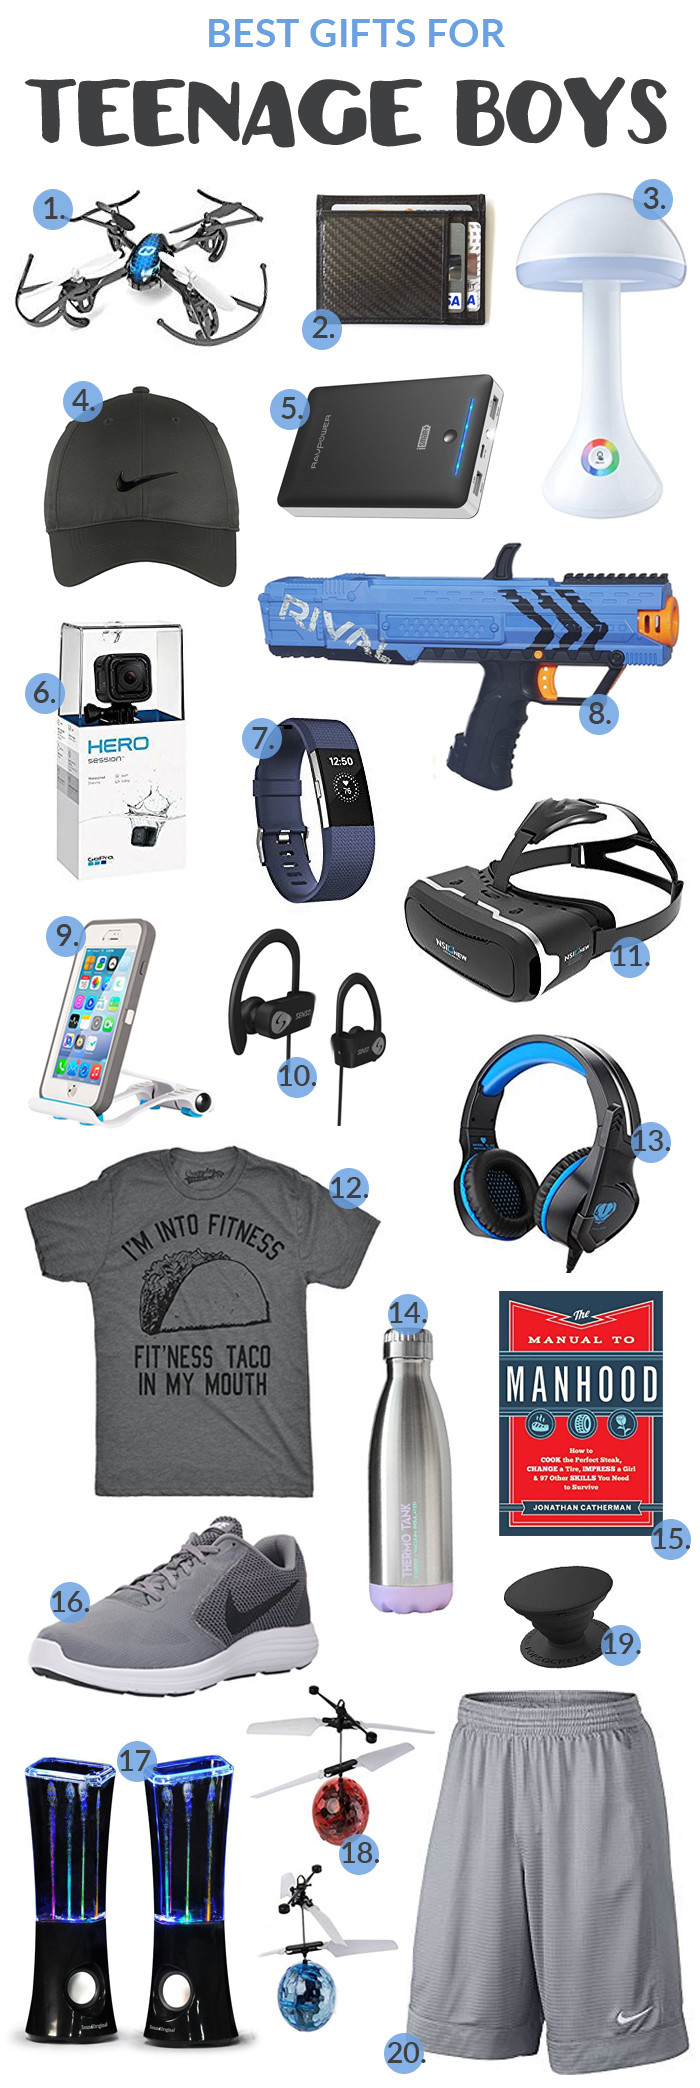 Gift Ideas For Tween Boys
 Best Gifts for Teenage Boys